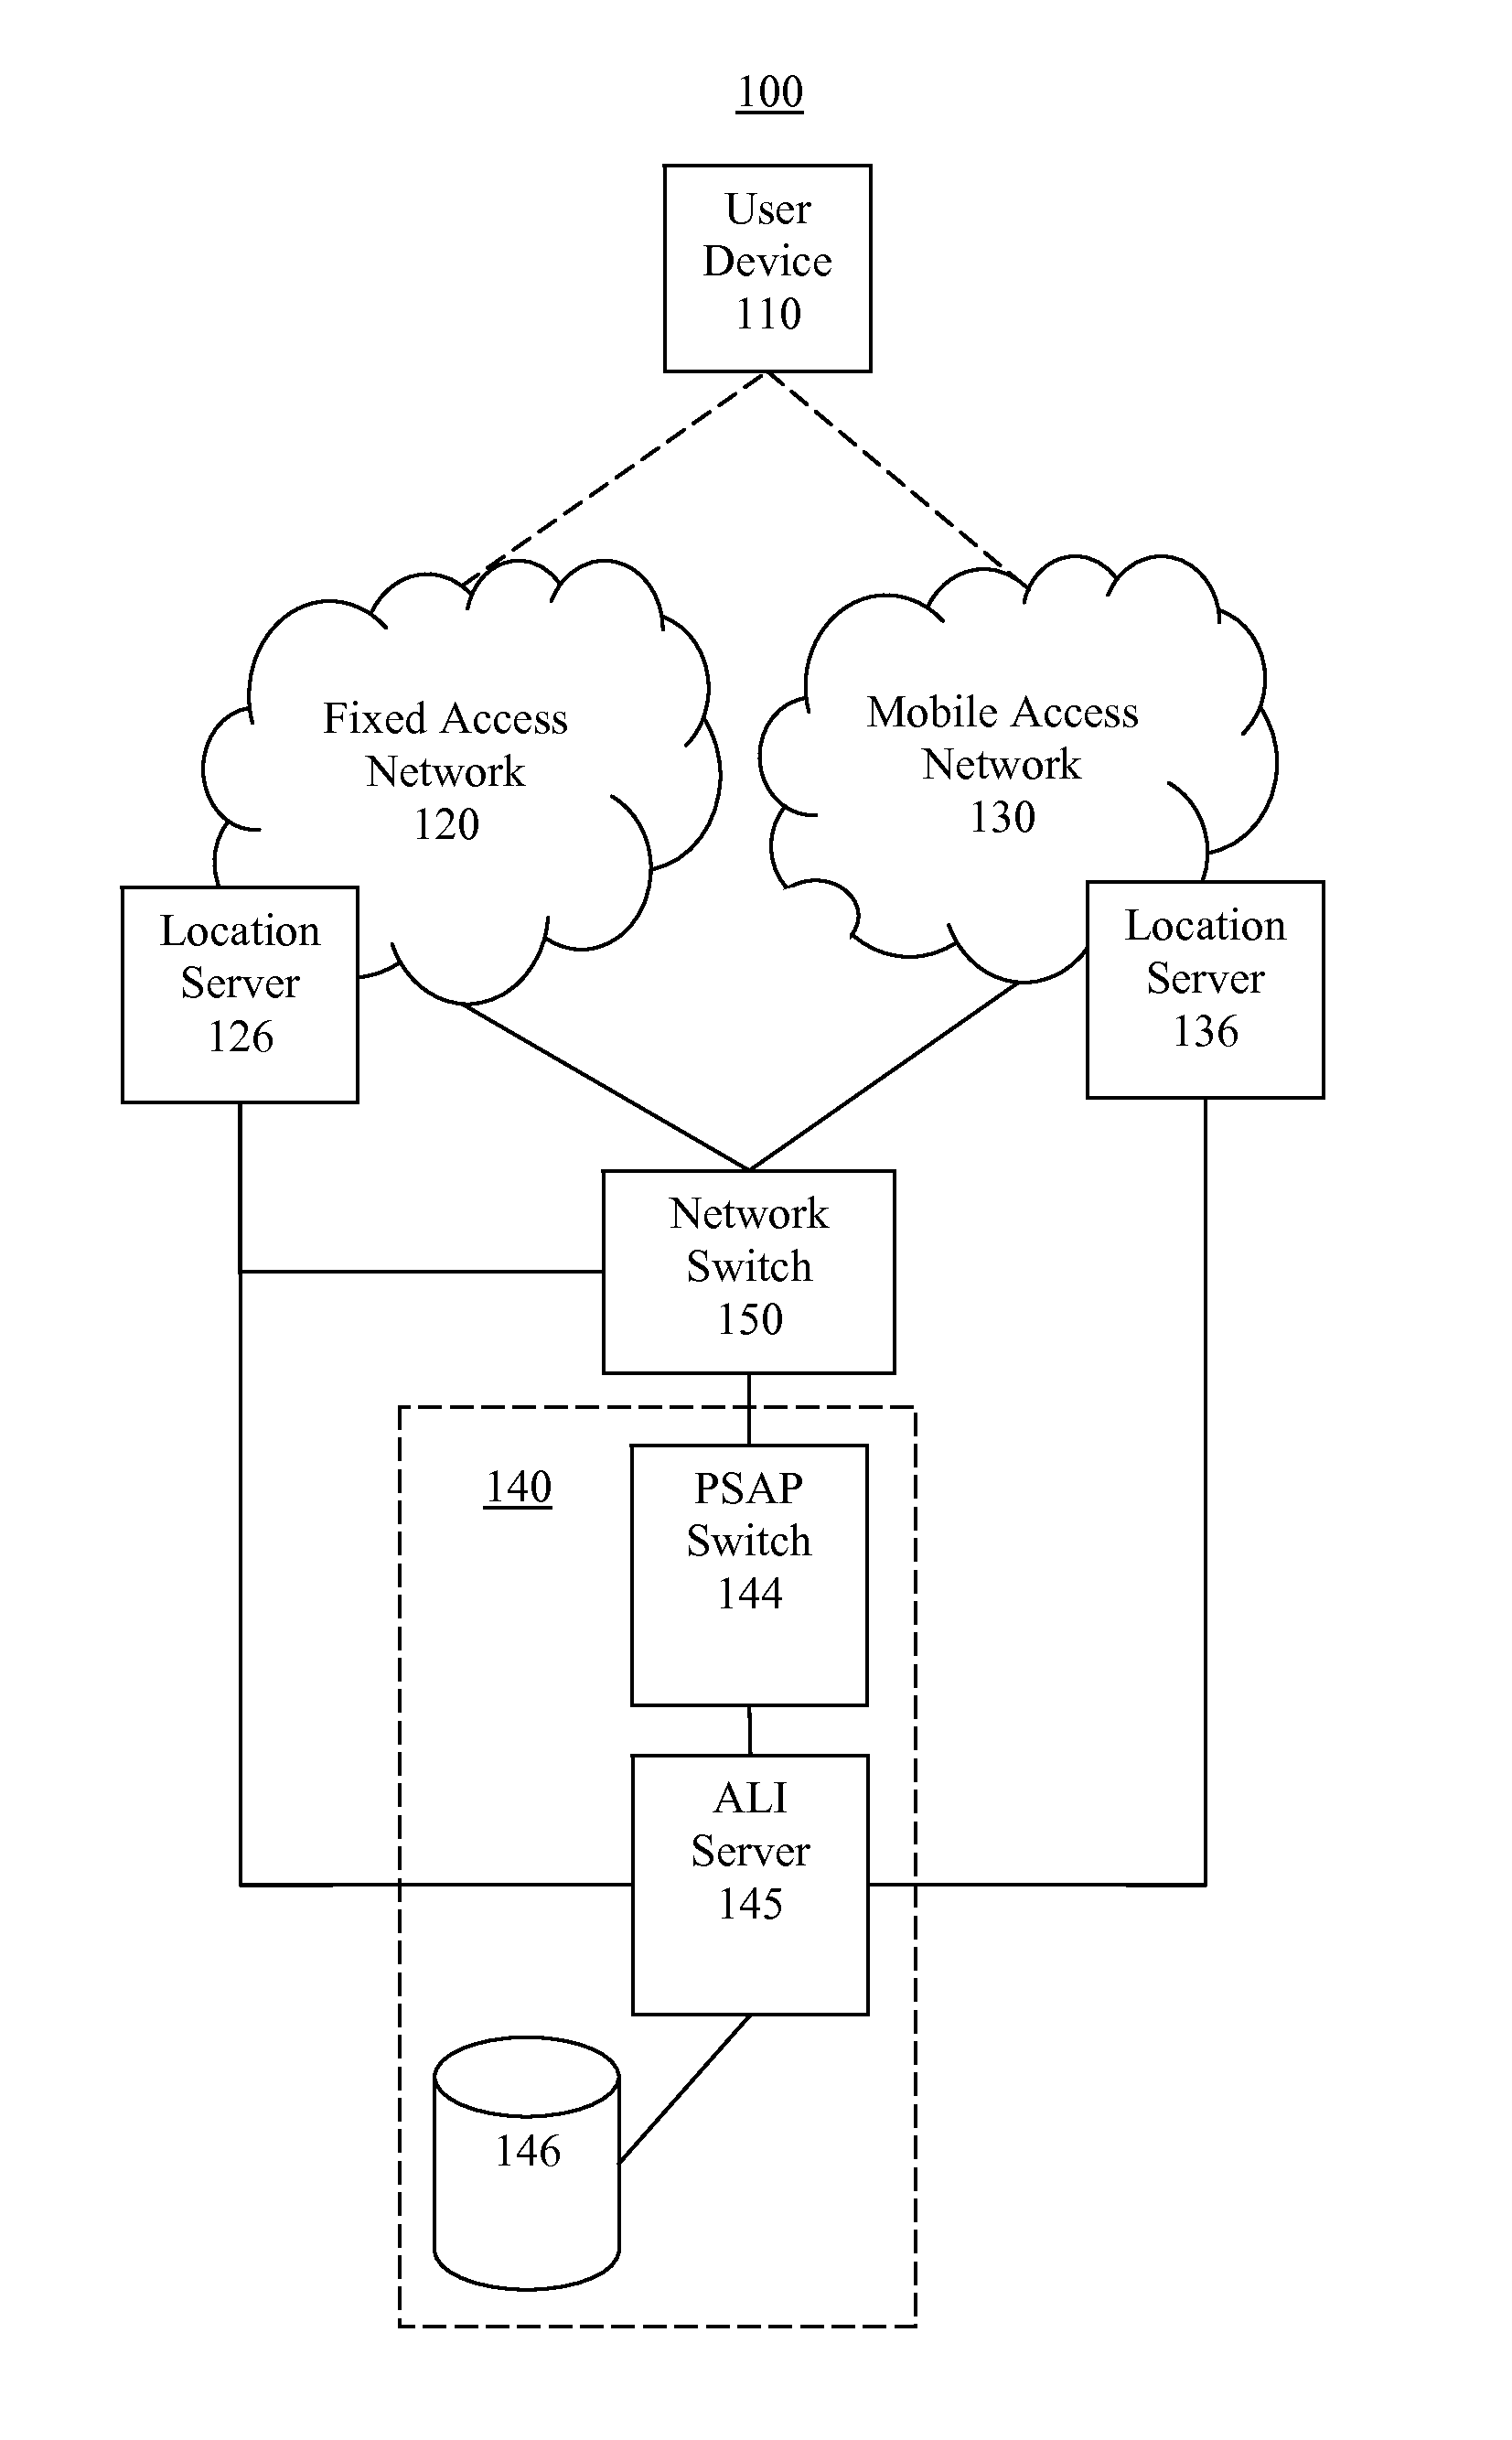 Enabling location determination of user device originating emergency service call